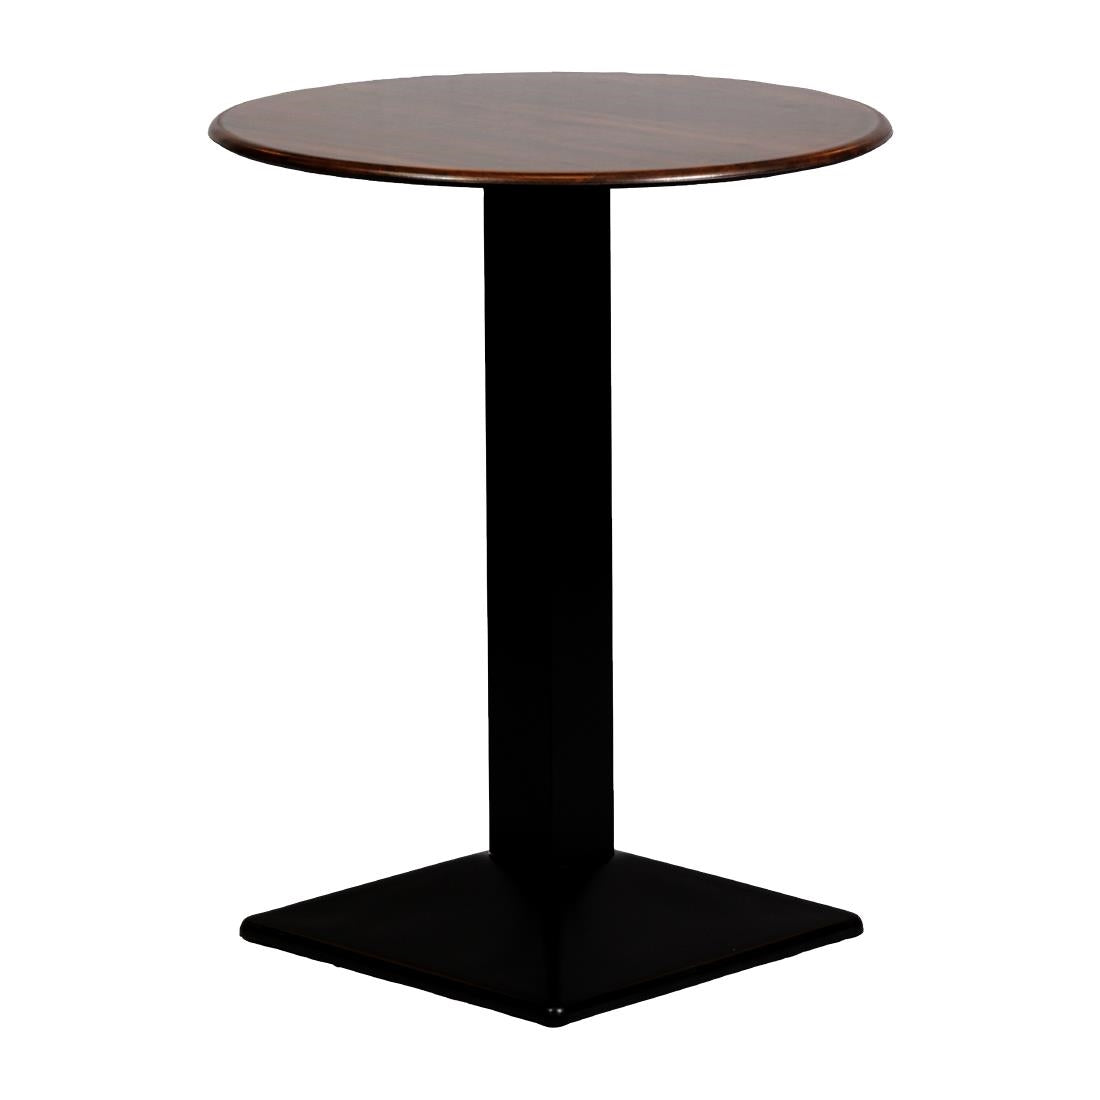 CZ837 Turin Metal Base Round Poseur Table with Laminate Top Walnut 600mm JD Catering Equipment Solutions Ltd